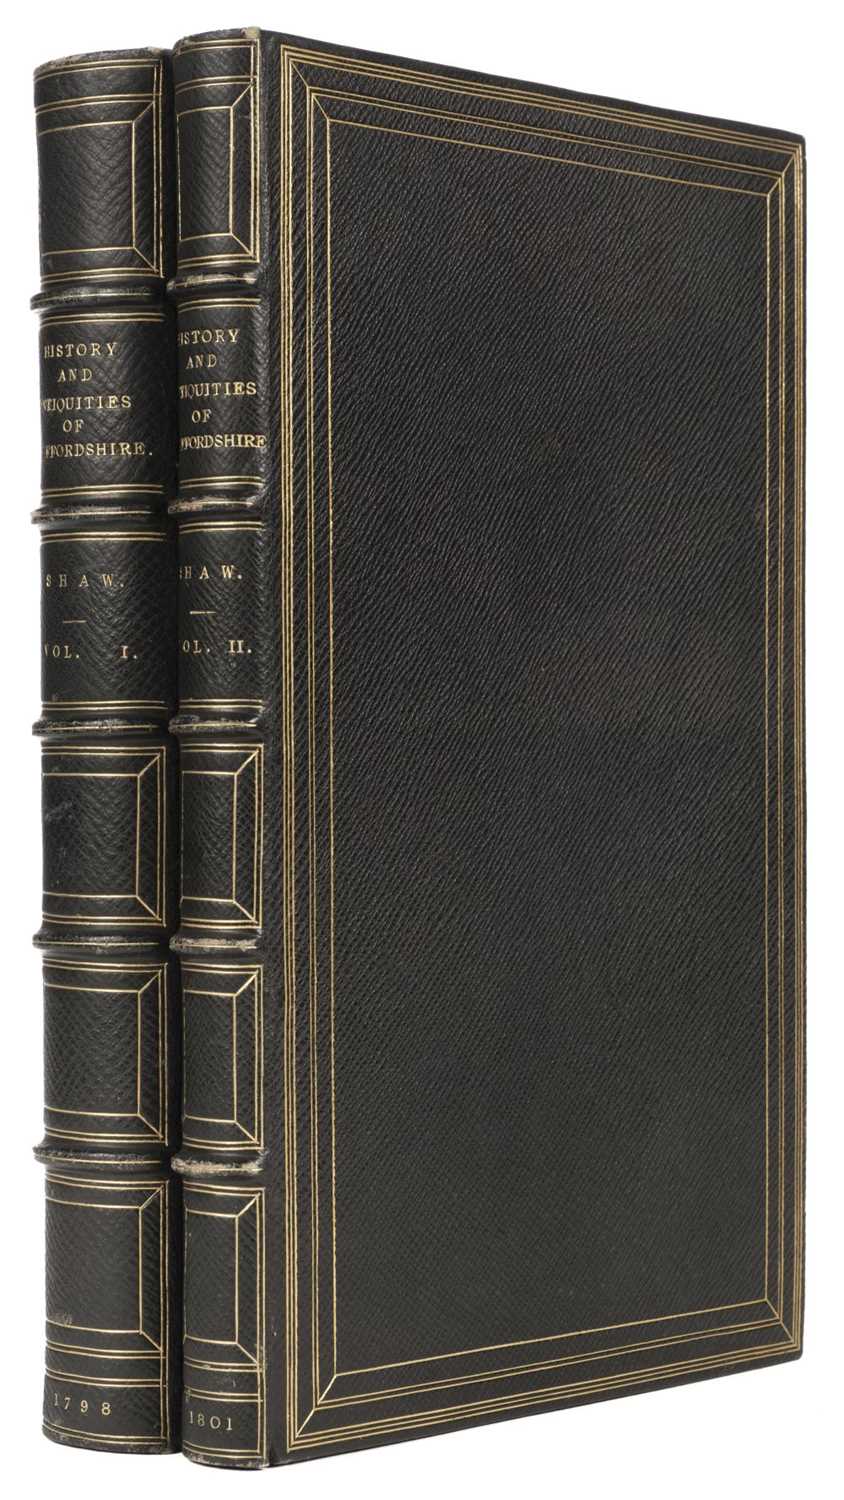 Lot 55 - Shaw (Stebbing). The History and Antiquities of Staffordshire